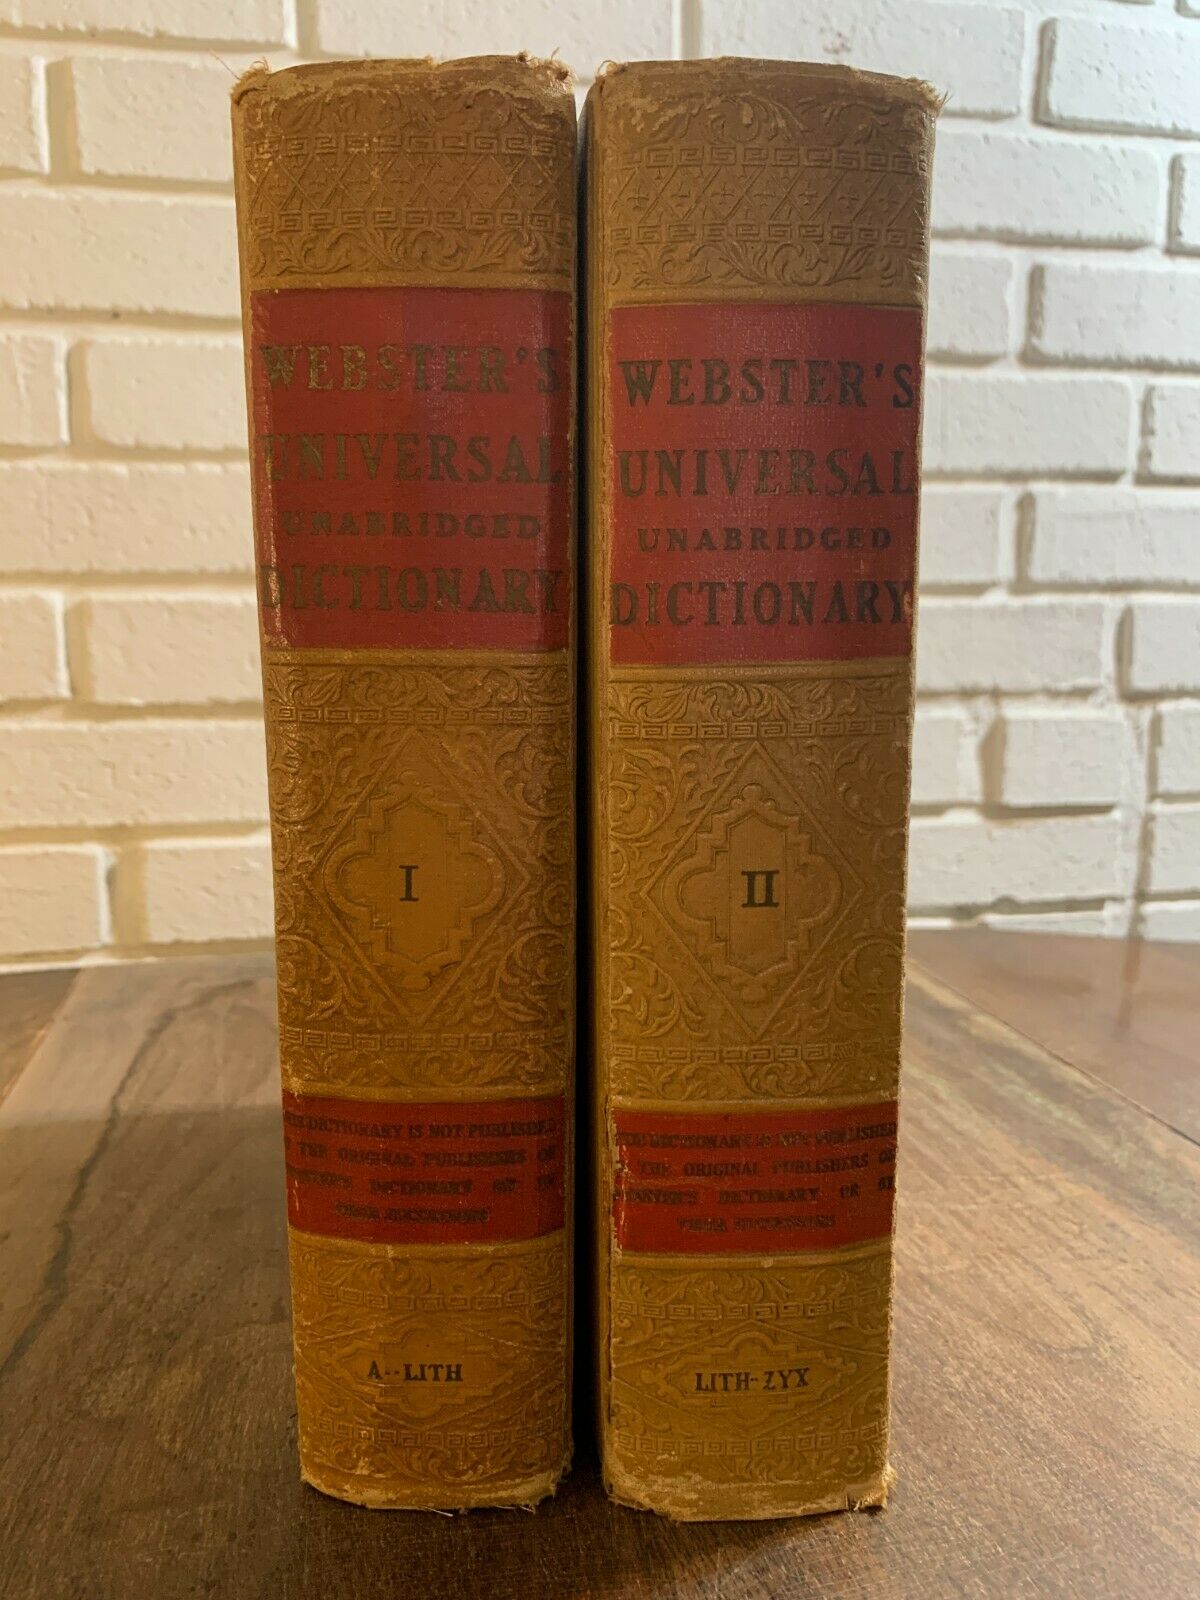 Webster’s Universal Unabridged Dictionary Ornate Embossed Two Vol. Set, 1936